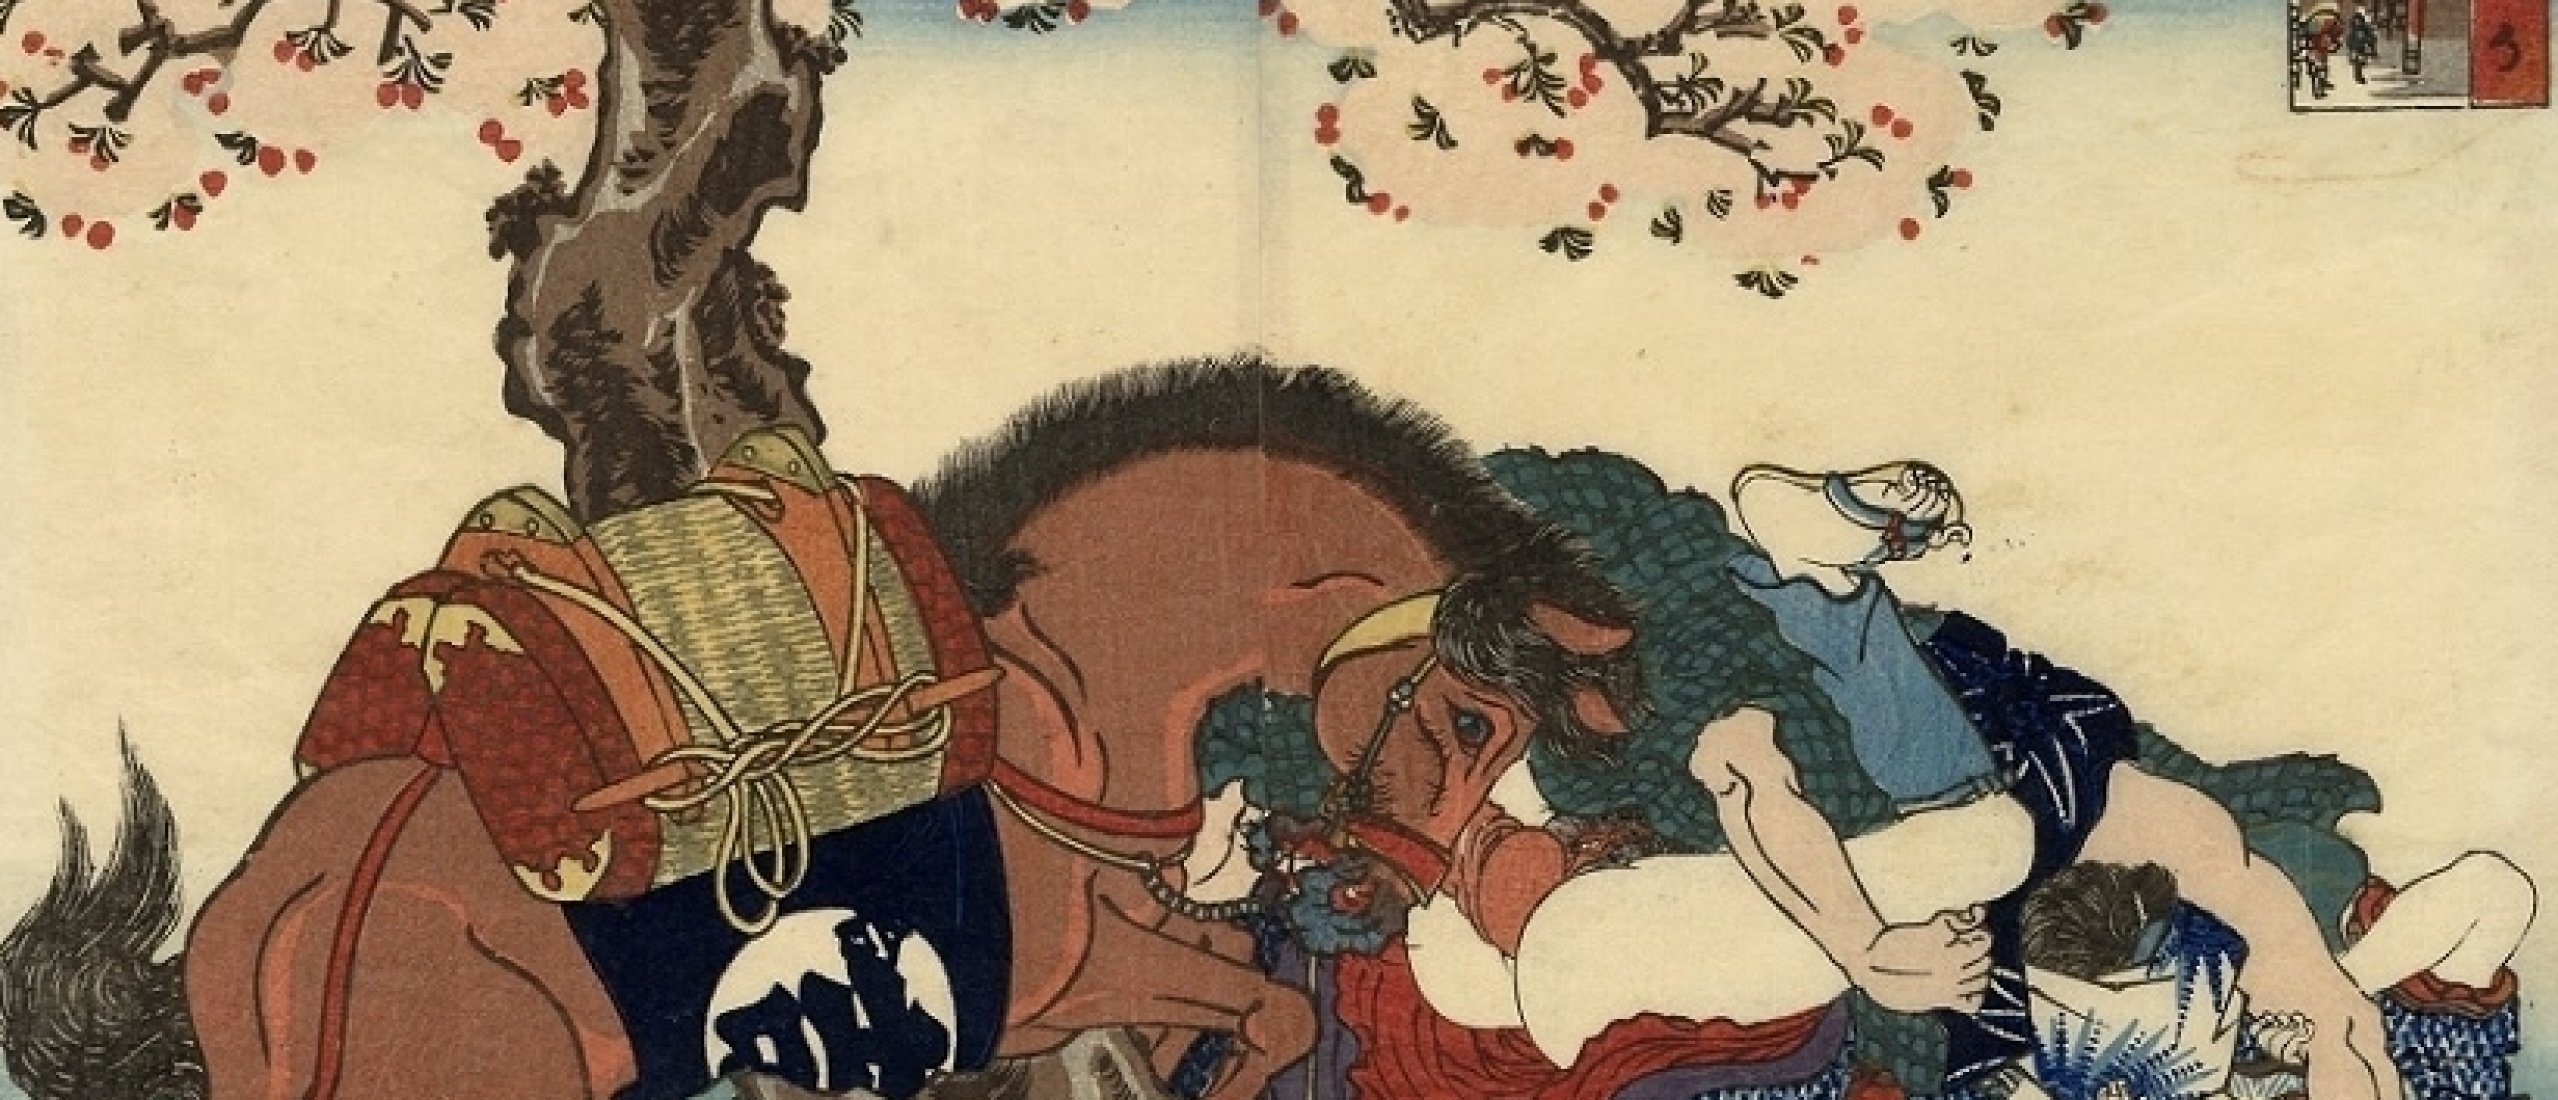 Horny Horses and Camels in Shunga Art